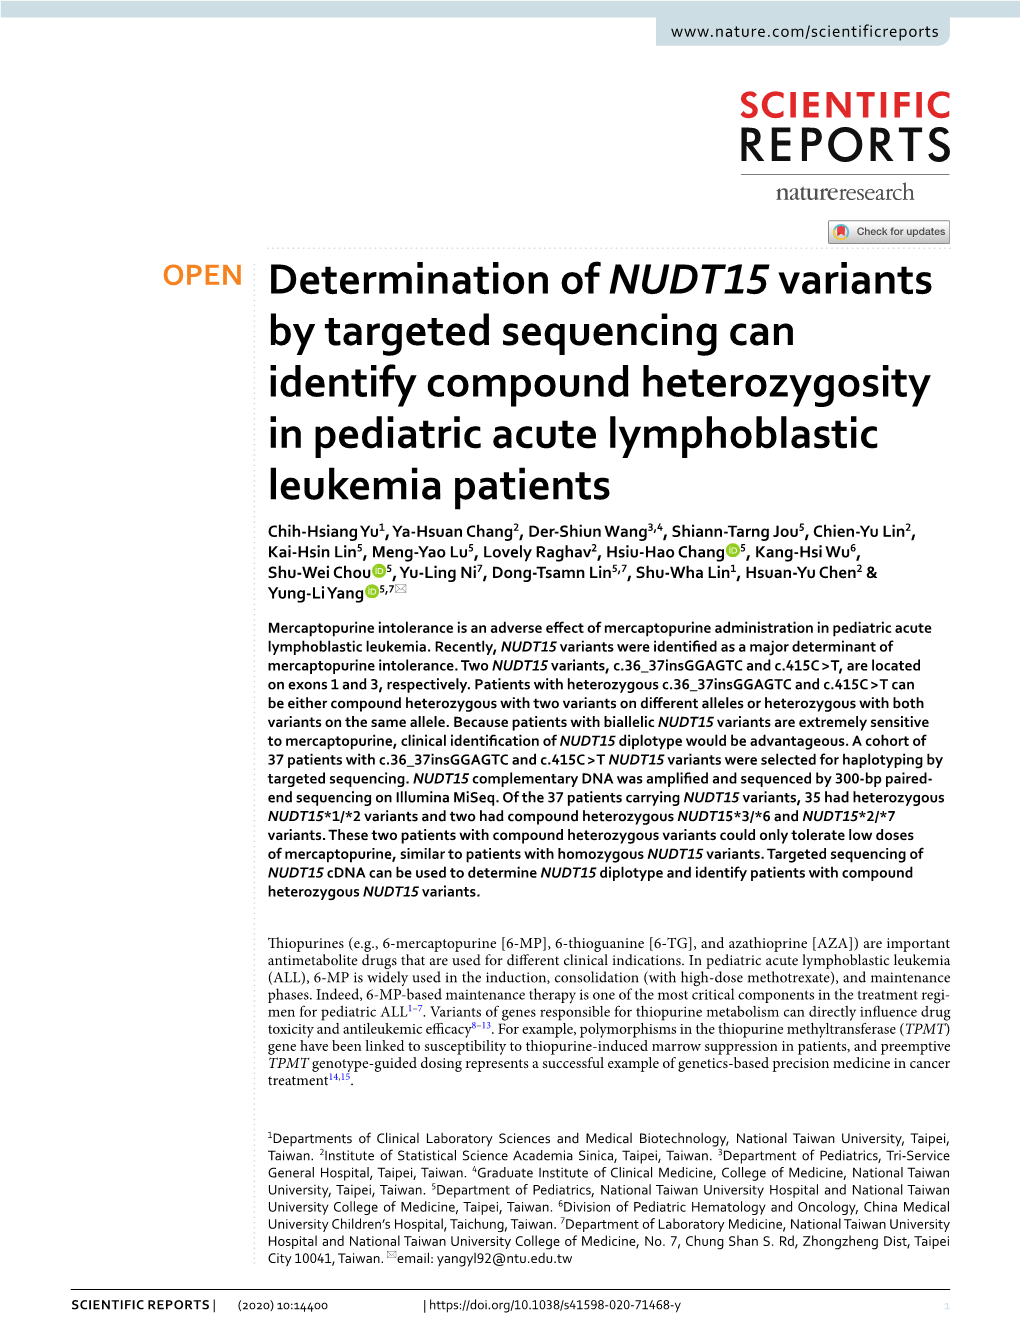 Determination of NUDT15 Variants by Targeted Sequencing Can Identify